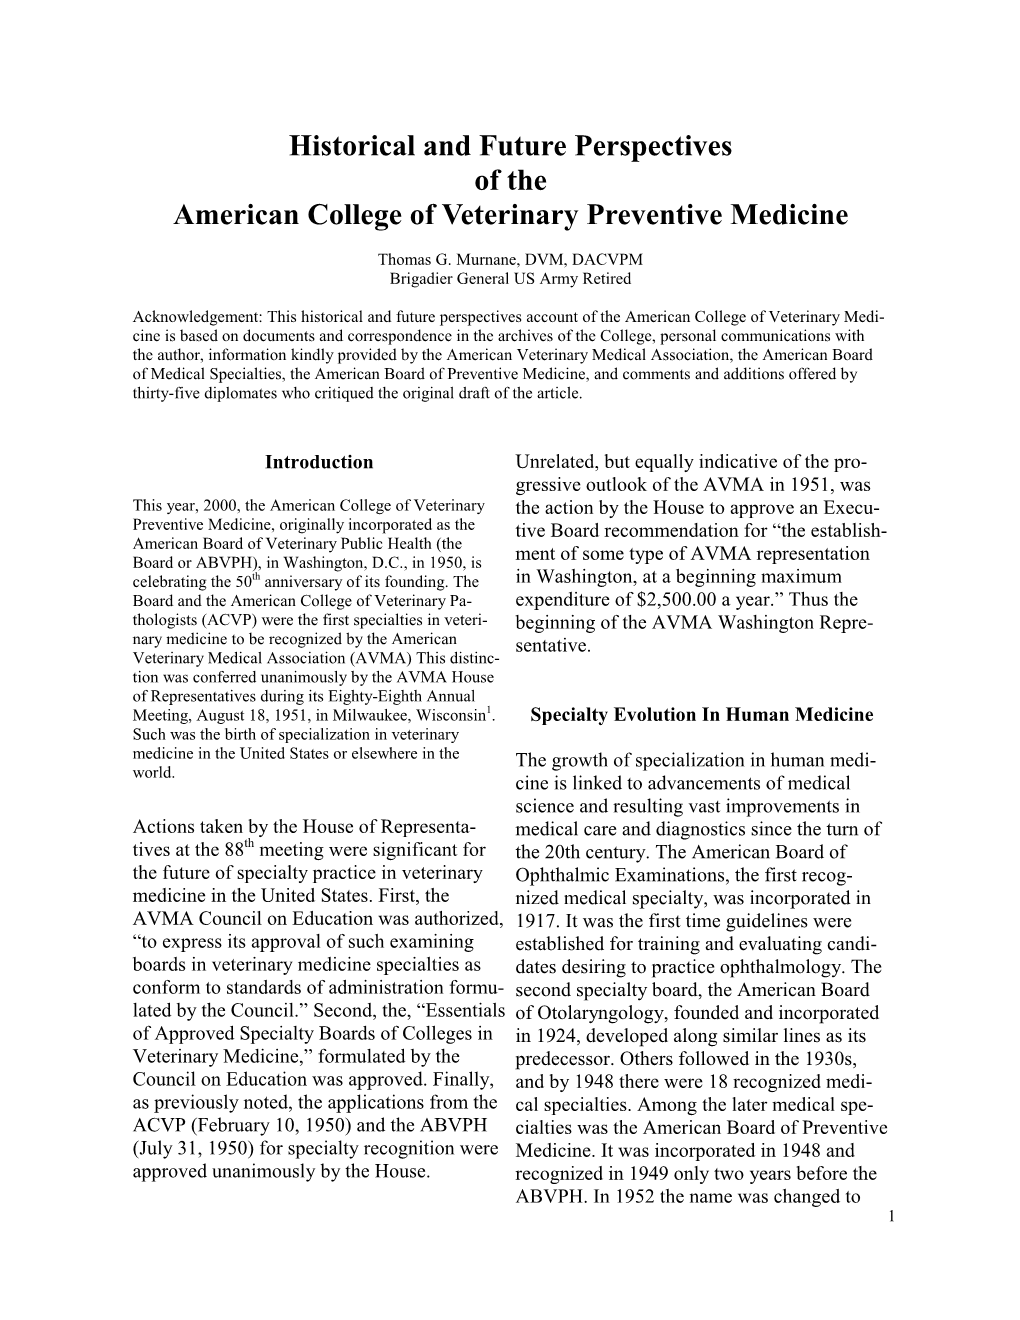 Historical and Future Perspectives of the American College of Veterinary Preventive Medicine